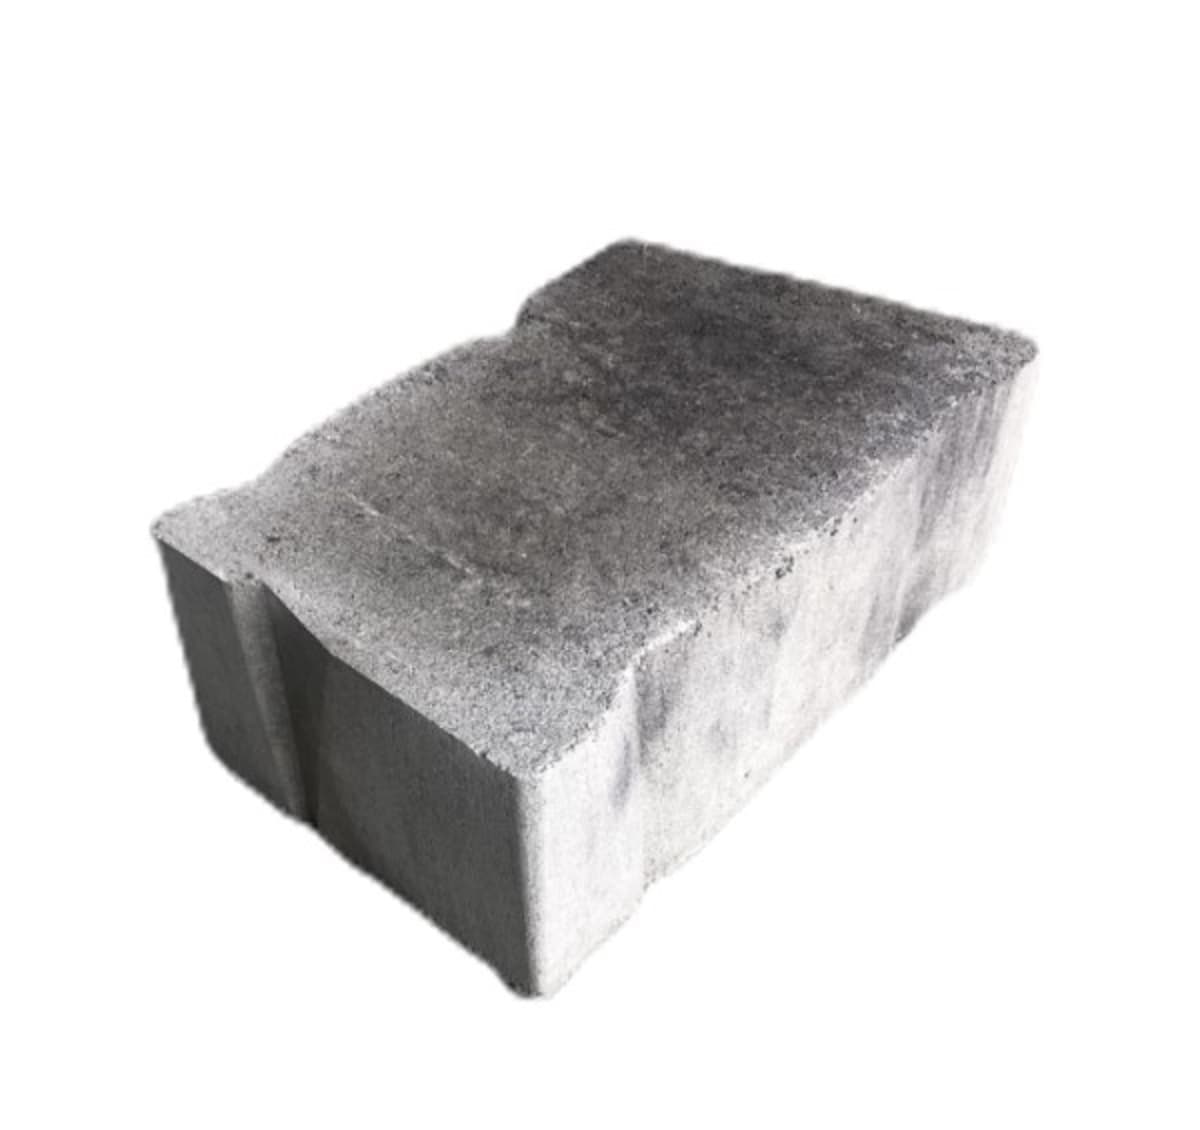 5-in H x 13-in L x 7.625-in D Gray/Charcoal Concrete Retaining Wall ...